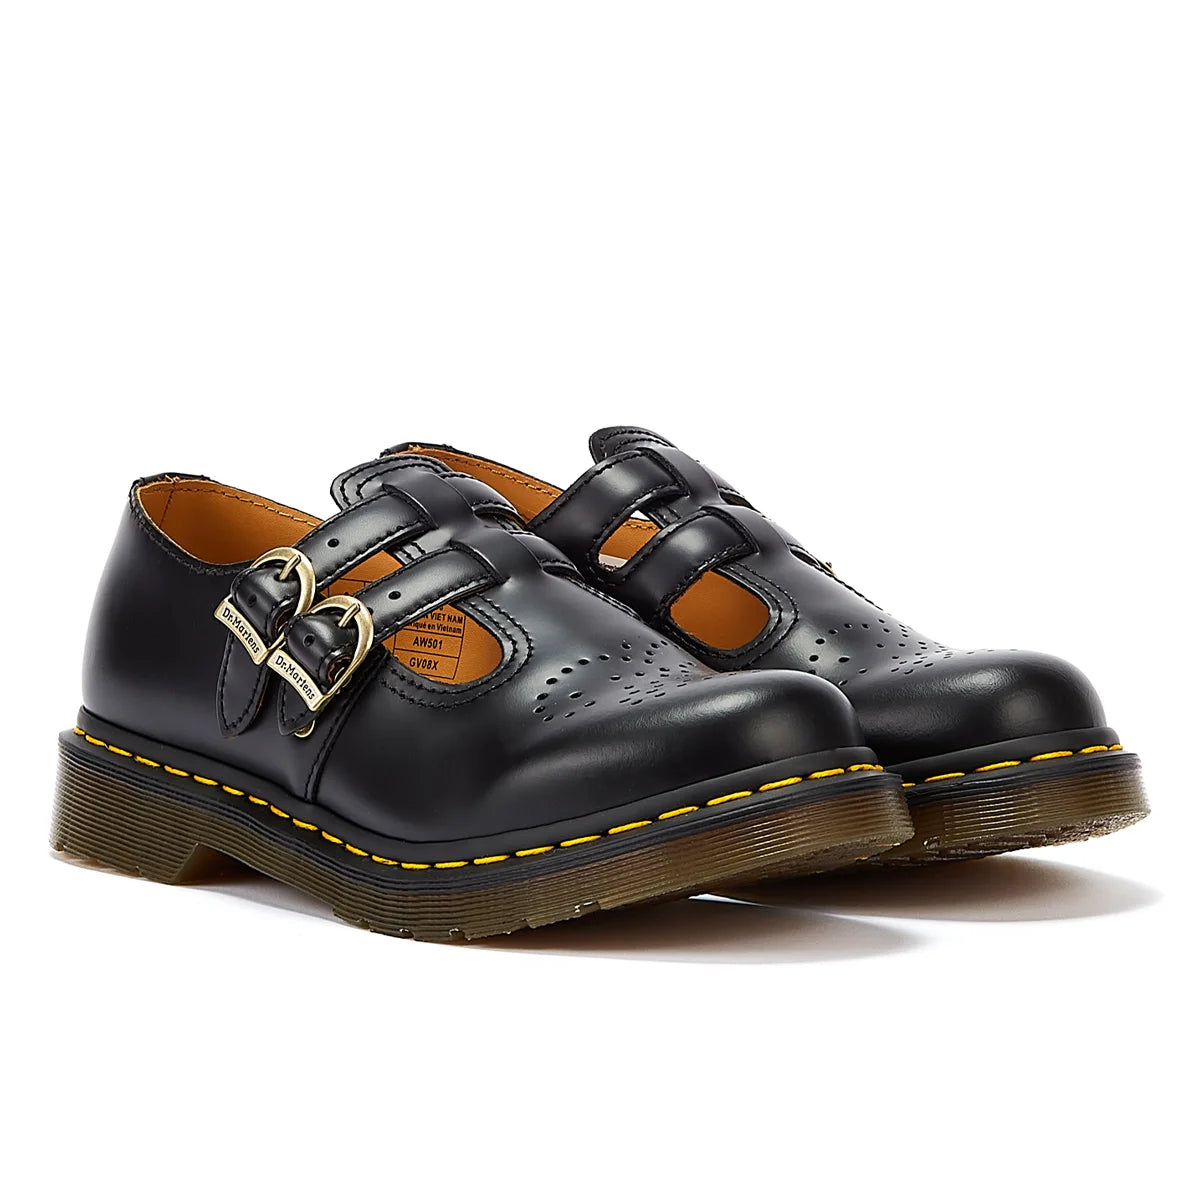 Dr. Martens 8065 Mary Jane Smooth Women’s Black Comfort Shoes